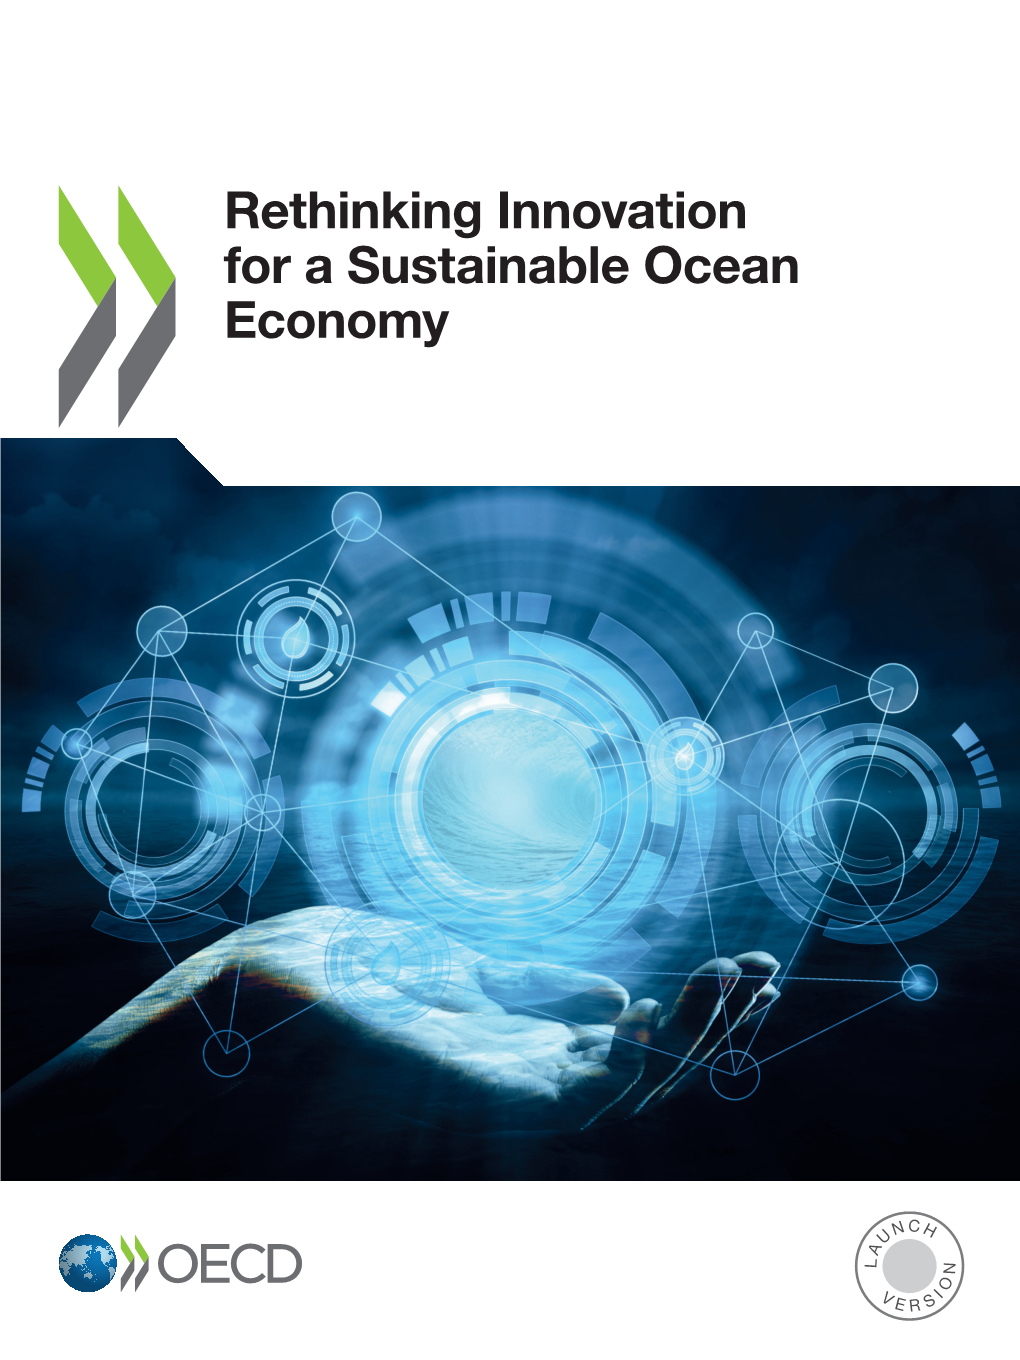 Rethinking Innovation for a Sustainable Ocean Economy Rethinking Innovation for Innovation Rethinking a Sustainable Ocean Economy Ocean Sustainable